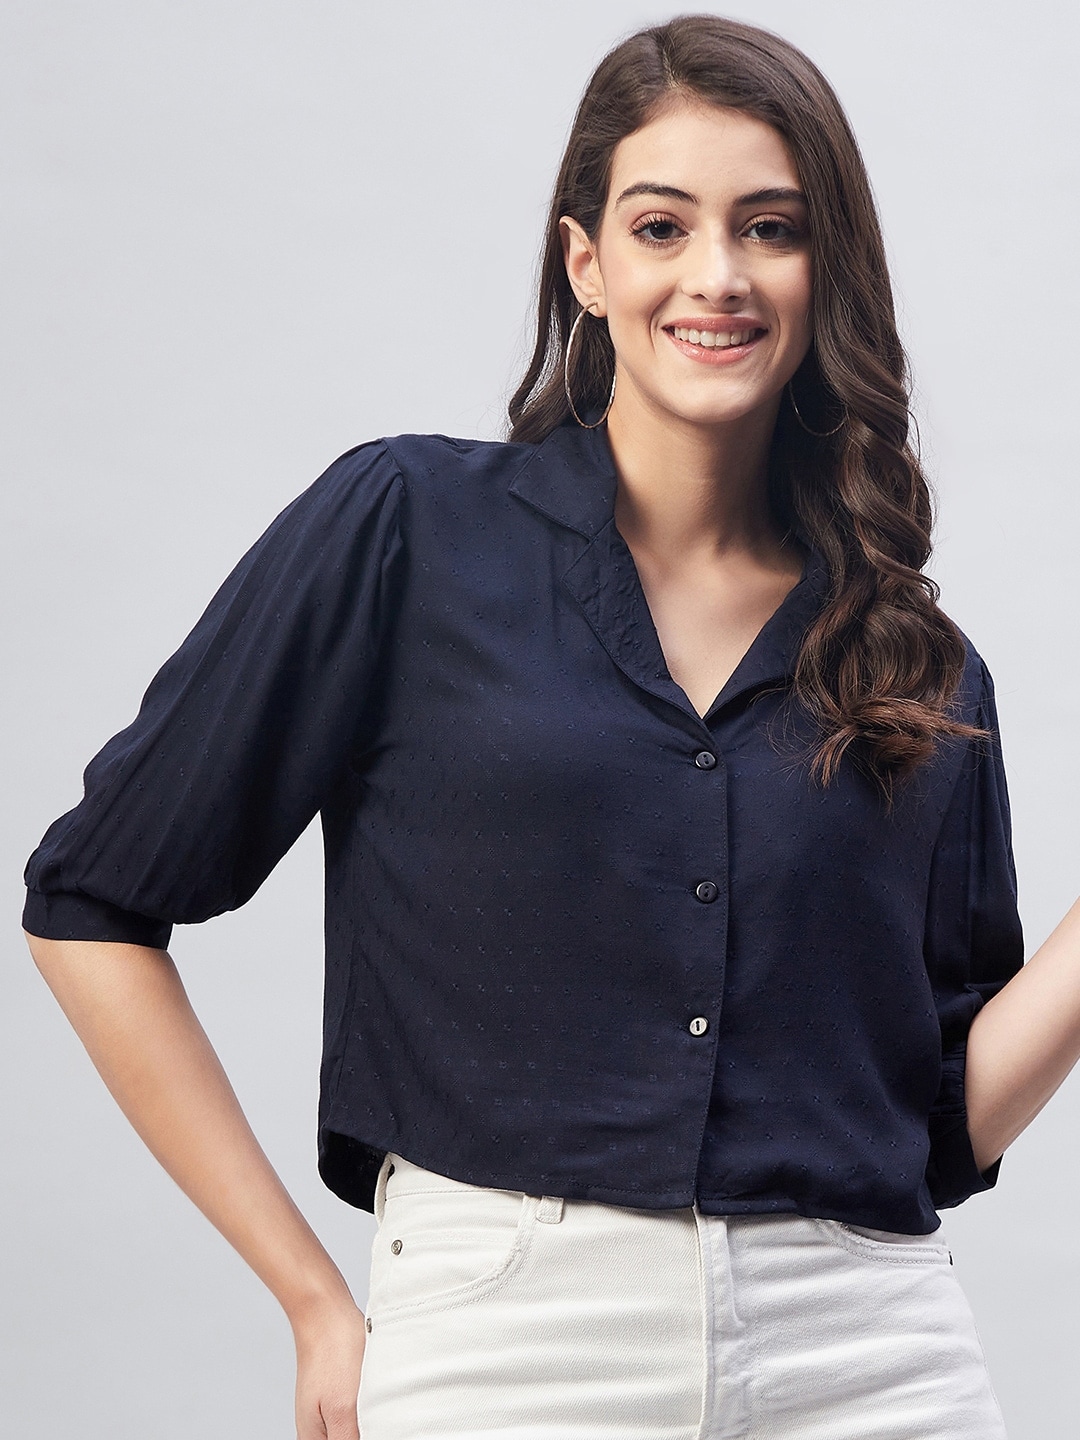 Marie Claire Shirt Style Top Price in India